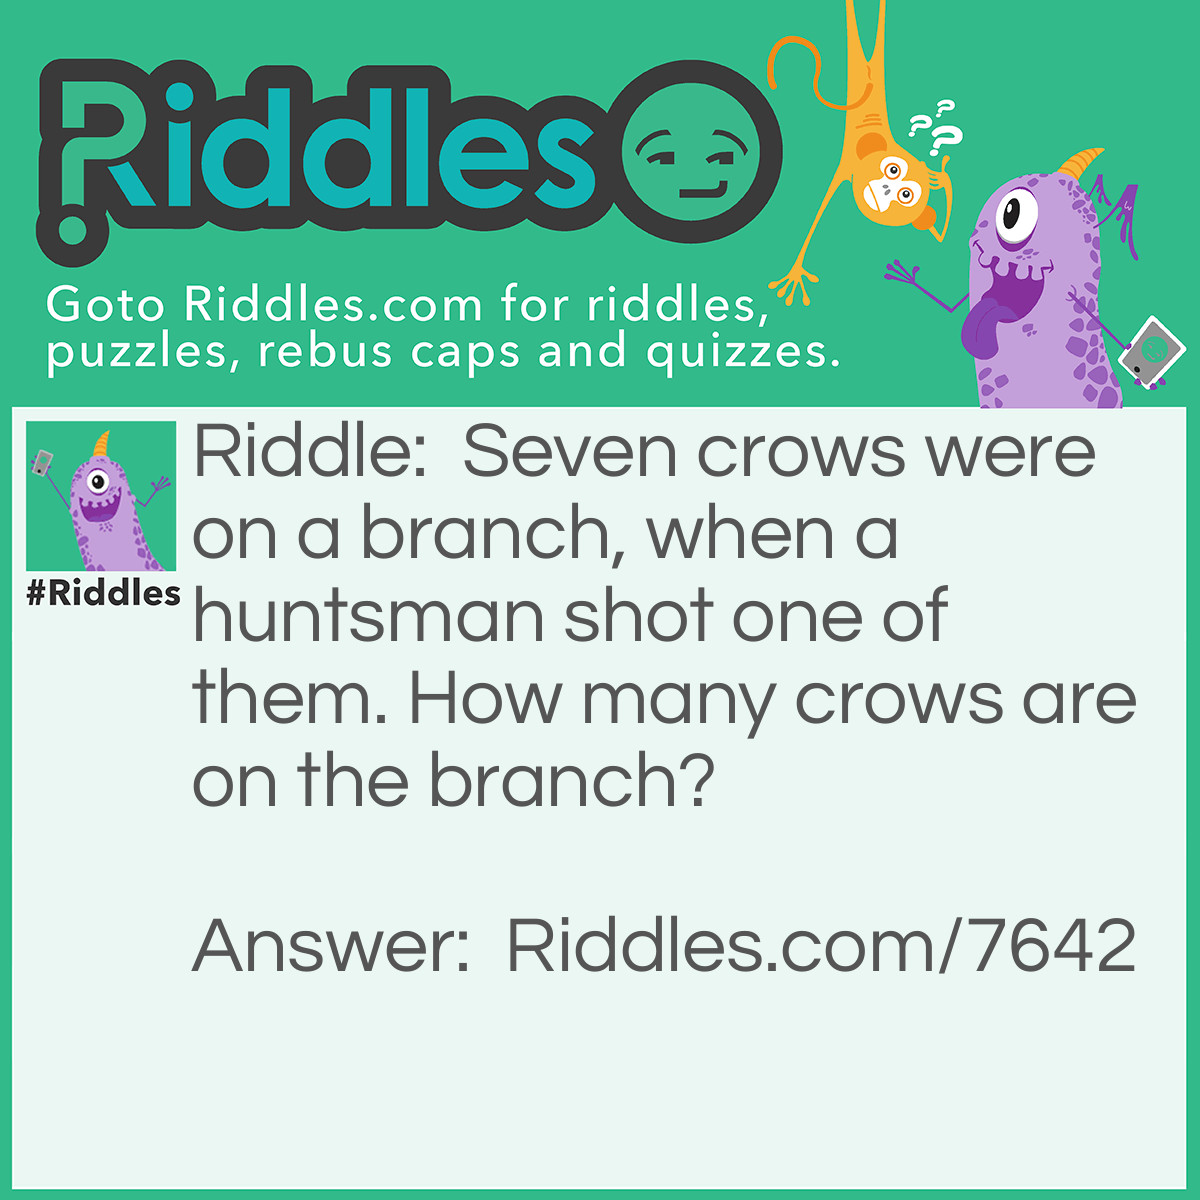 Riddle: Seven crows were on a branch, when a huntsman shot one of them. How many crows are on the branch? Answer: None. The crows must have flown away because of the gunshot.